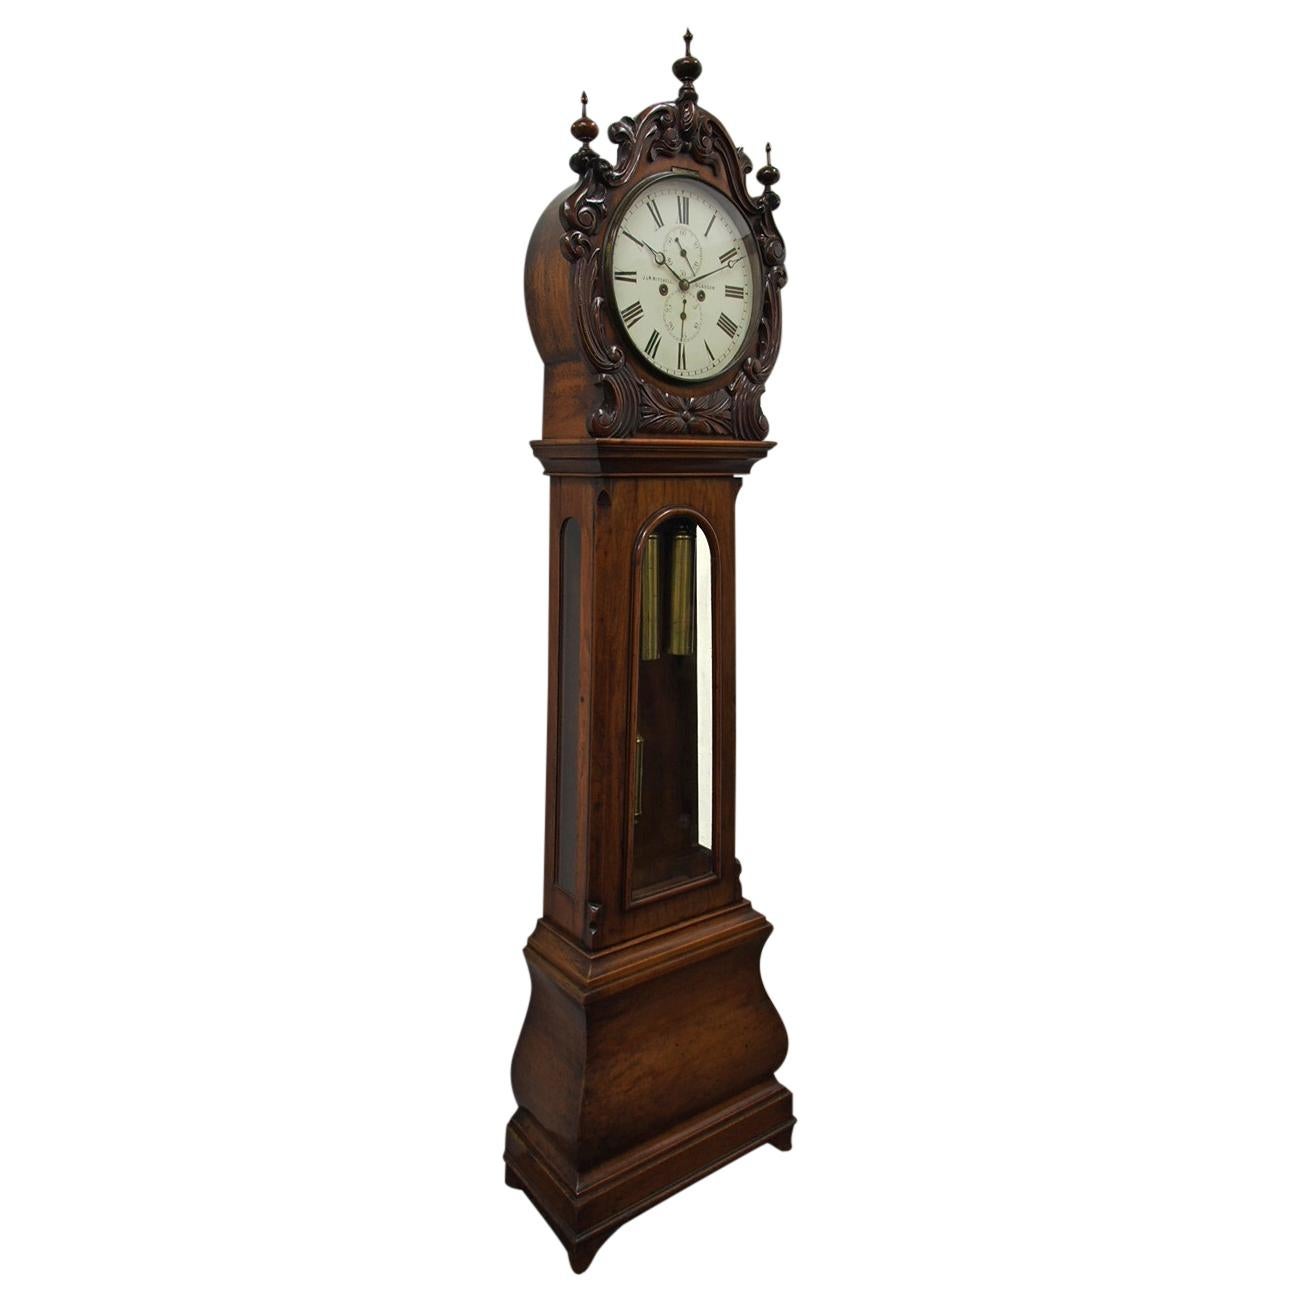 Exhibition quality carved drum head, glazed door grandfather clock by J. W. Mitchell of Glasgow, circa 1860. In the classic style of the period, the drum head is profusely carved with designs of C scrolls and flower heads, and the face has the